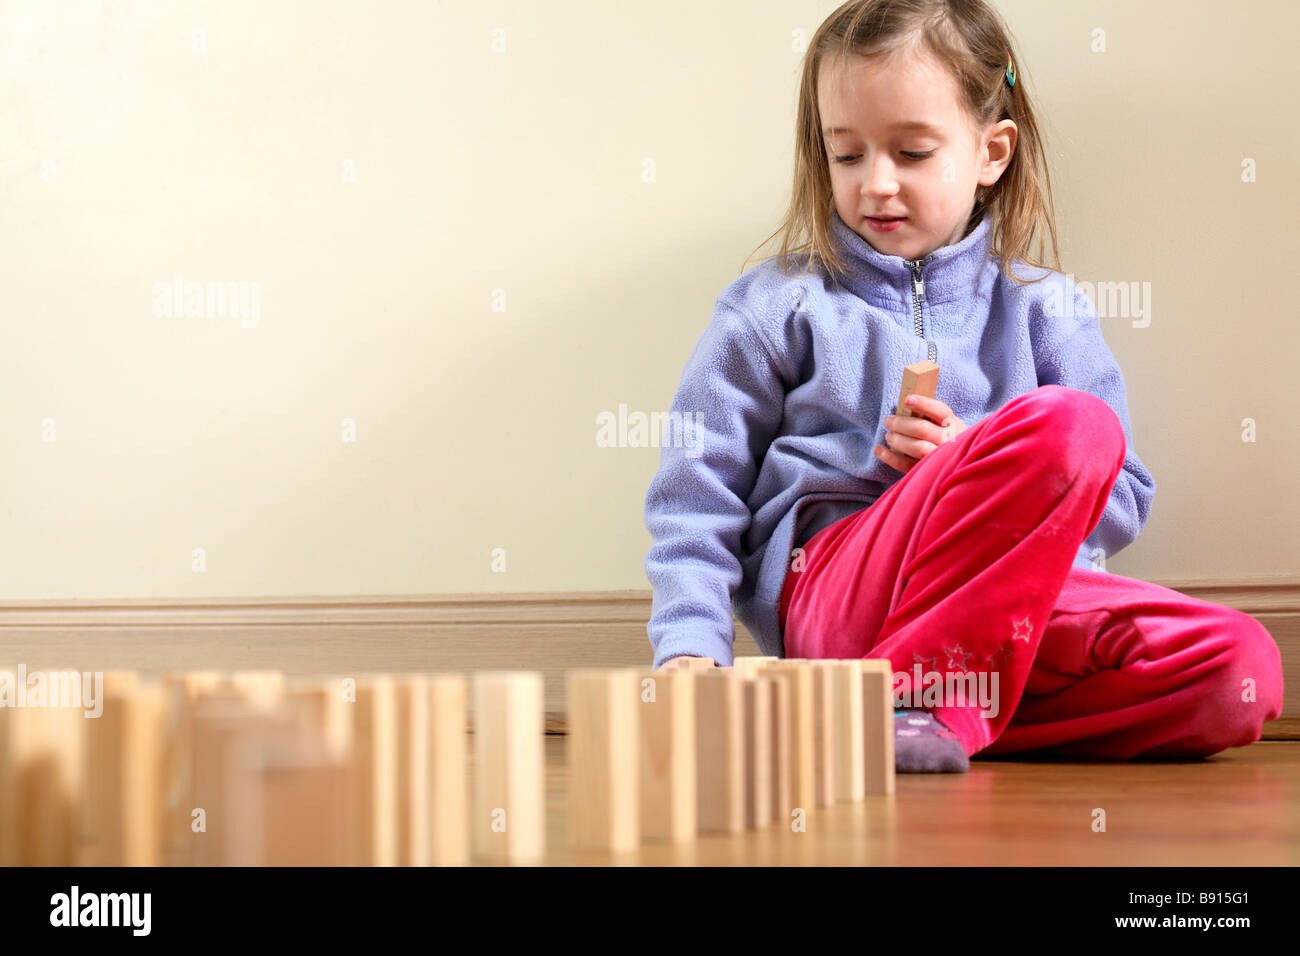 Young girl setting up wooden building blocks to play domino tumbling Stock Photo